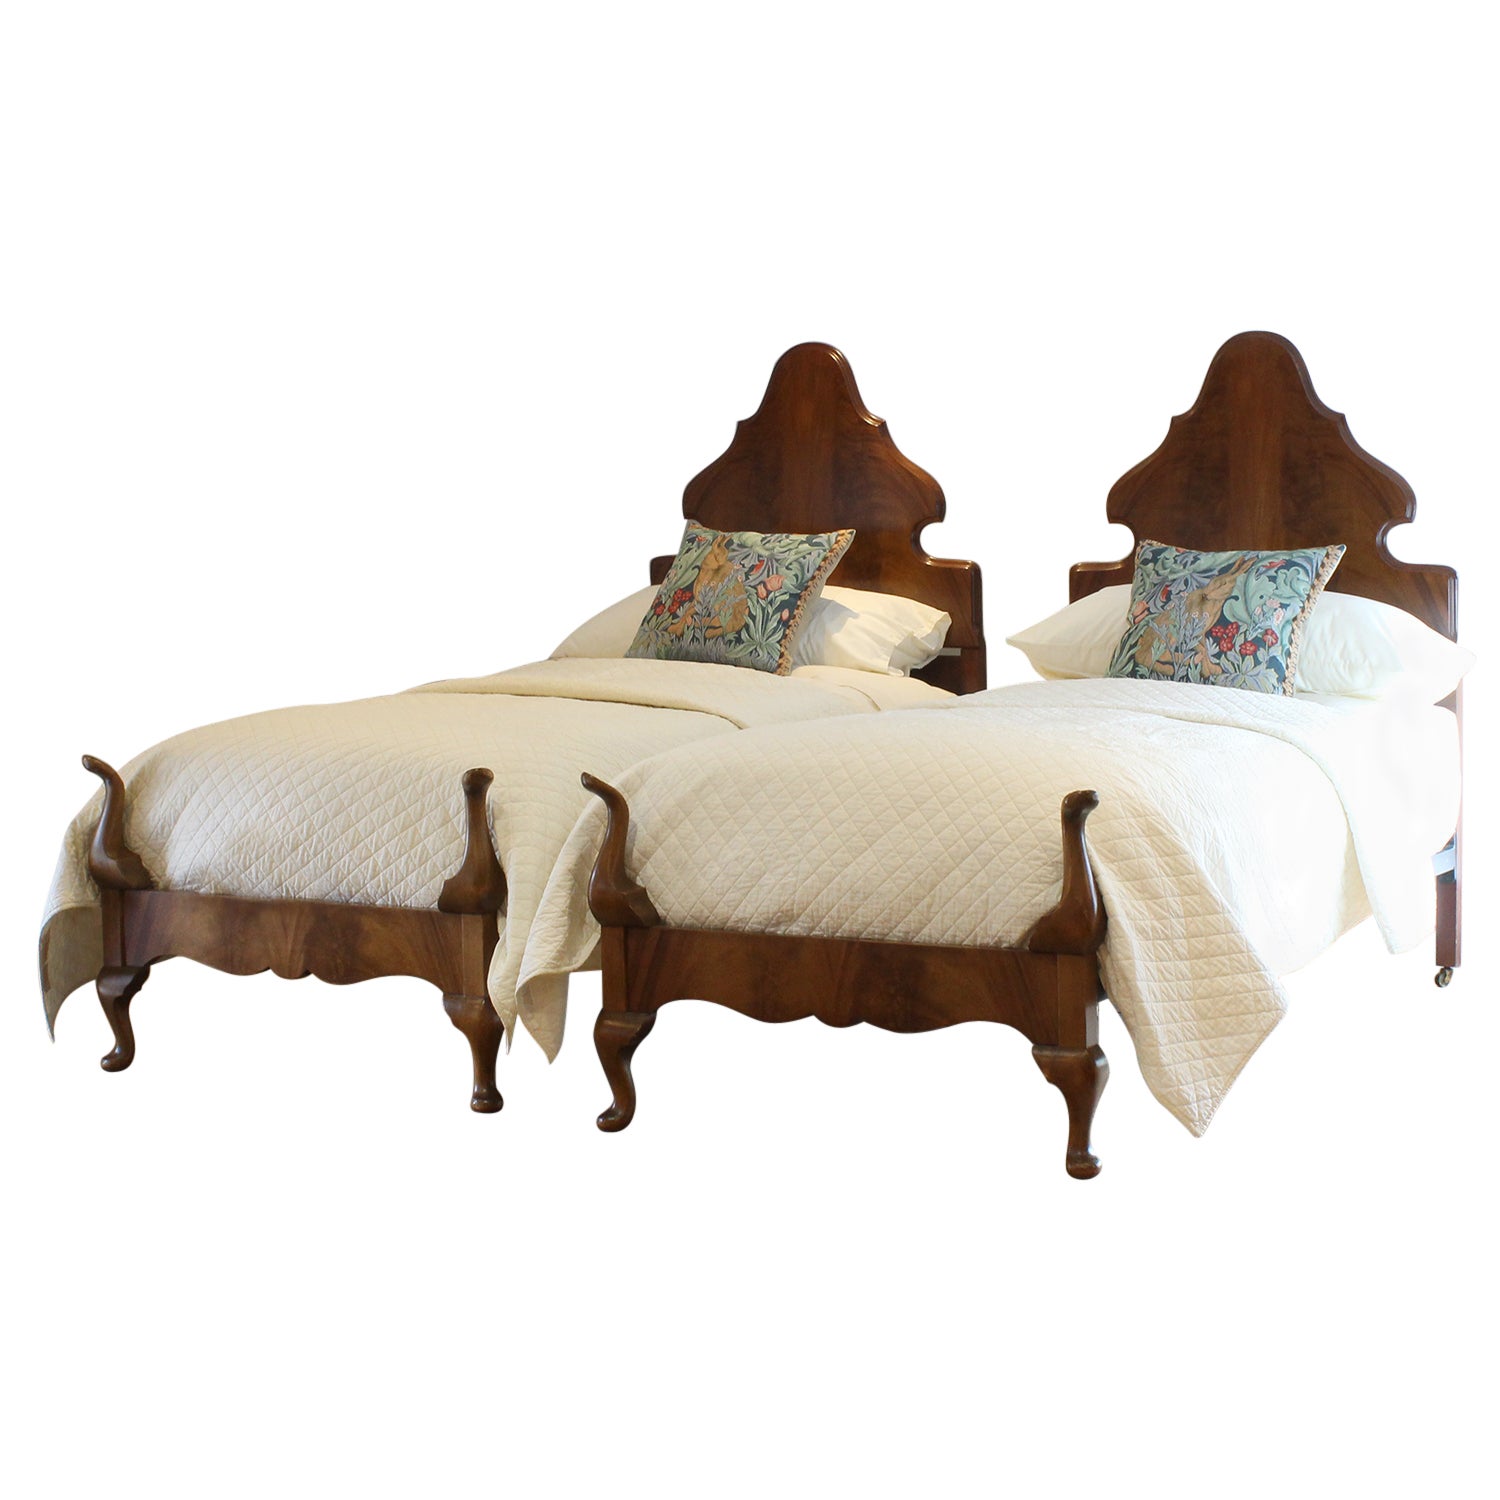 Pair of Queen Anne Style Antique Beds WP43